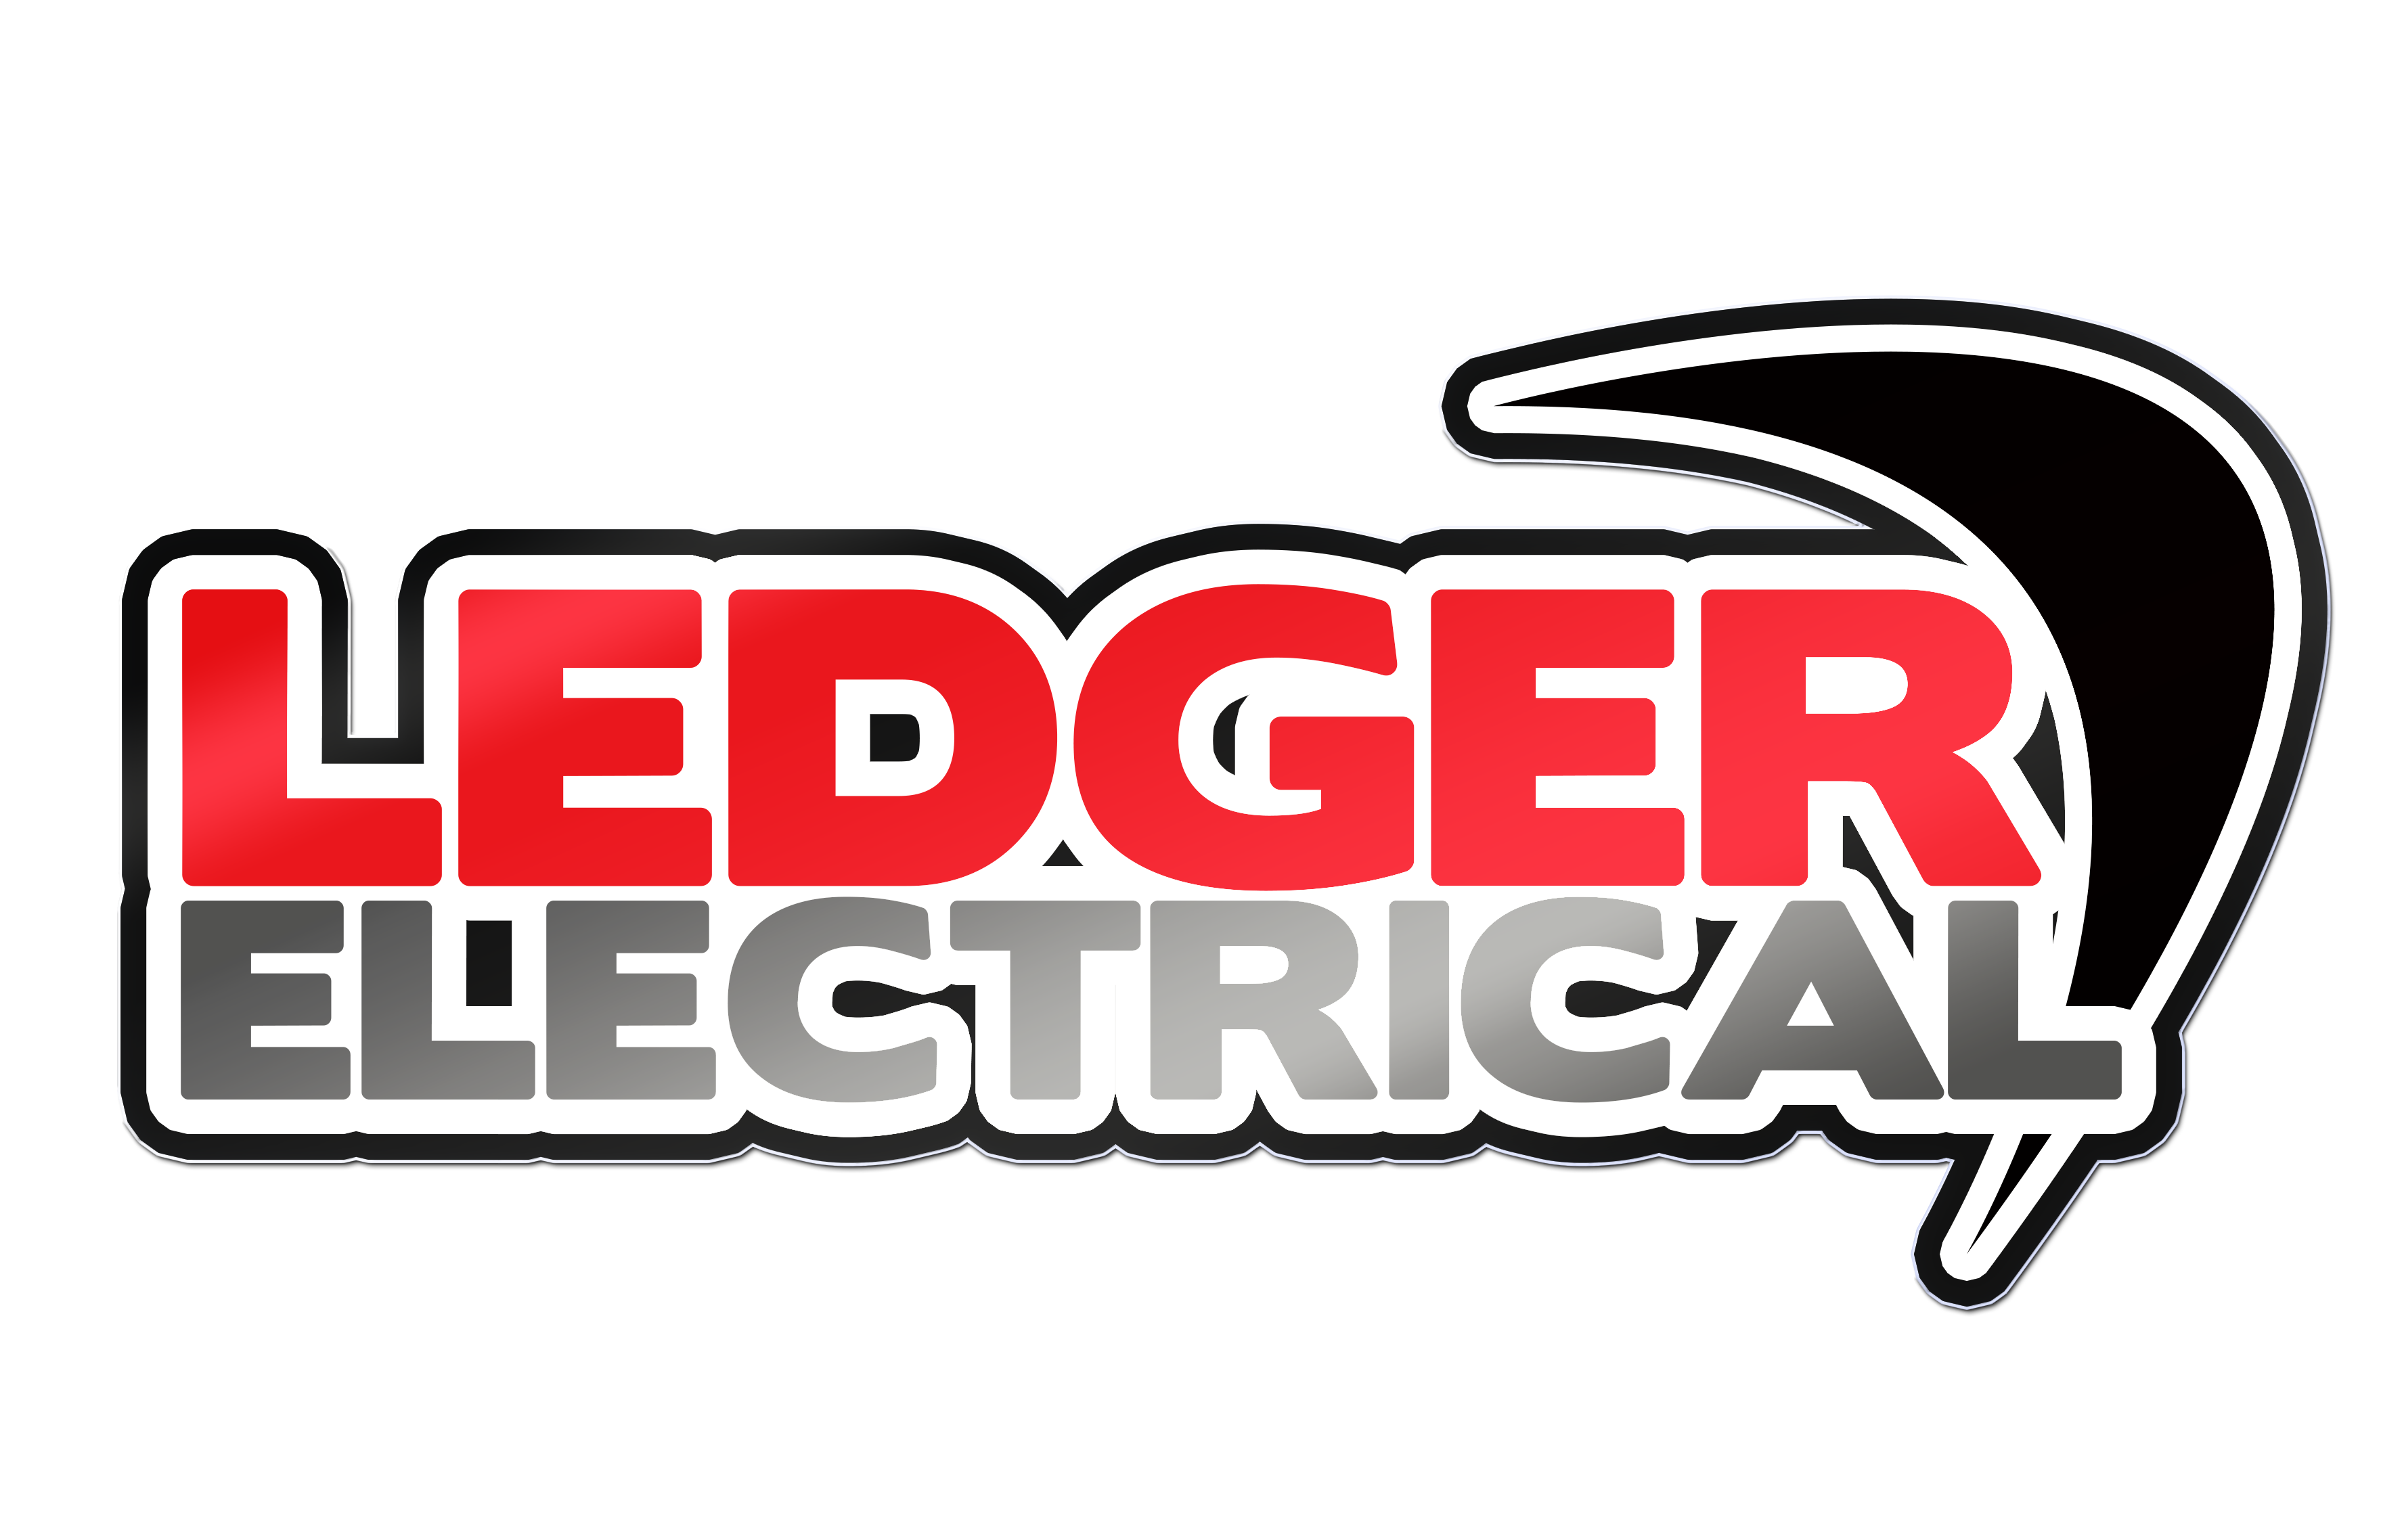 Electrician, electricians and electrical contractors opening times Barnsley, Sheffield, Doncaster, Wakefield, Pontefract, Huddersfield, Halifax, Leeds, Harrogate, Selby, York